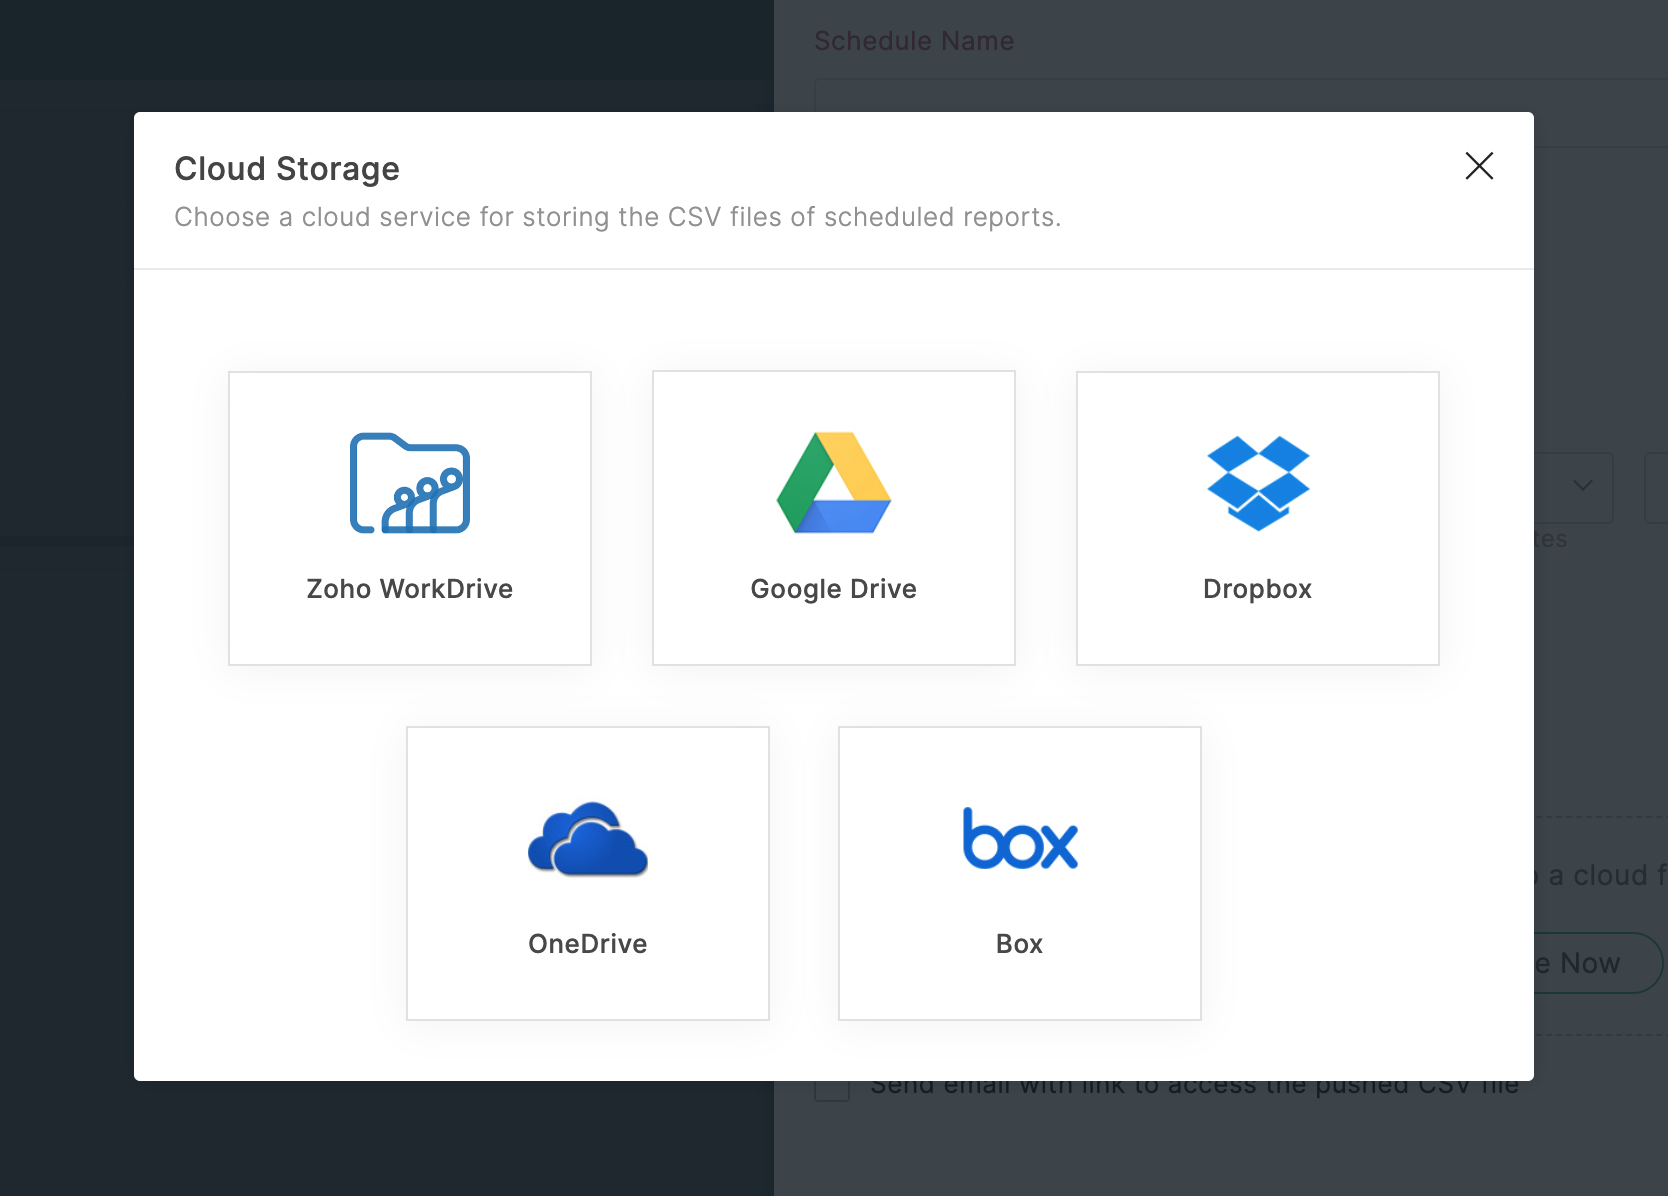 Choose a cloud service to store the CSV file of scheduled reports